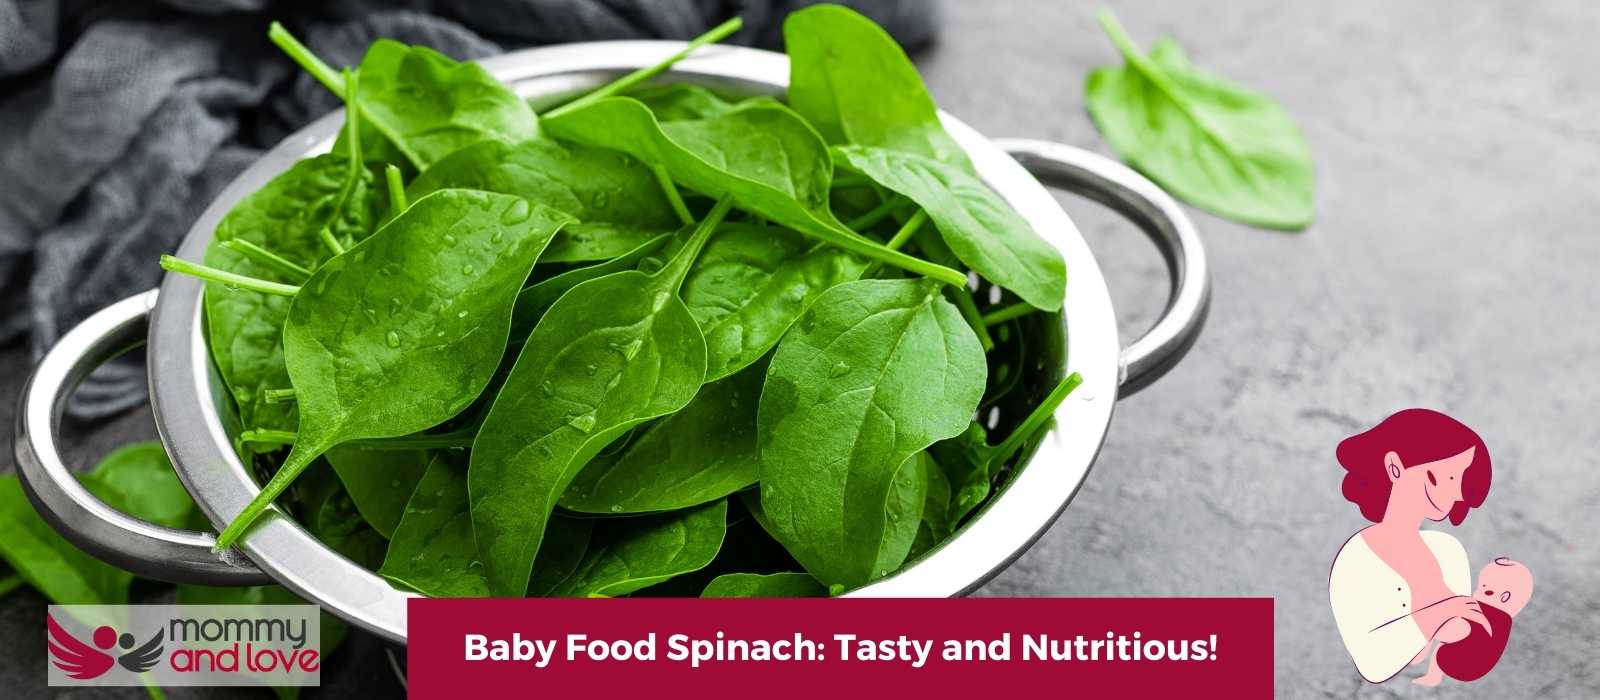 Baby Food Spinach: Tasty and Nutritious!